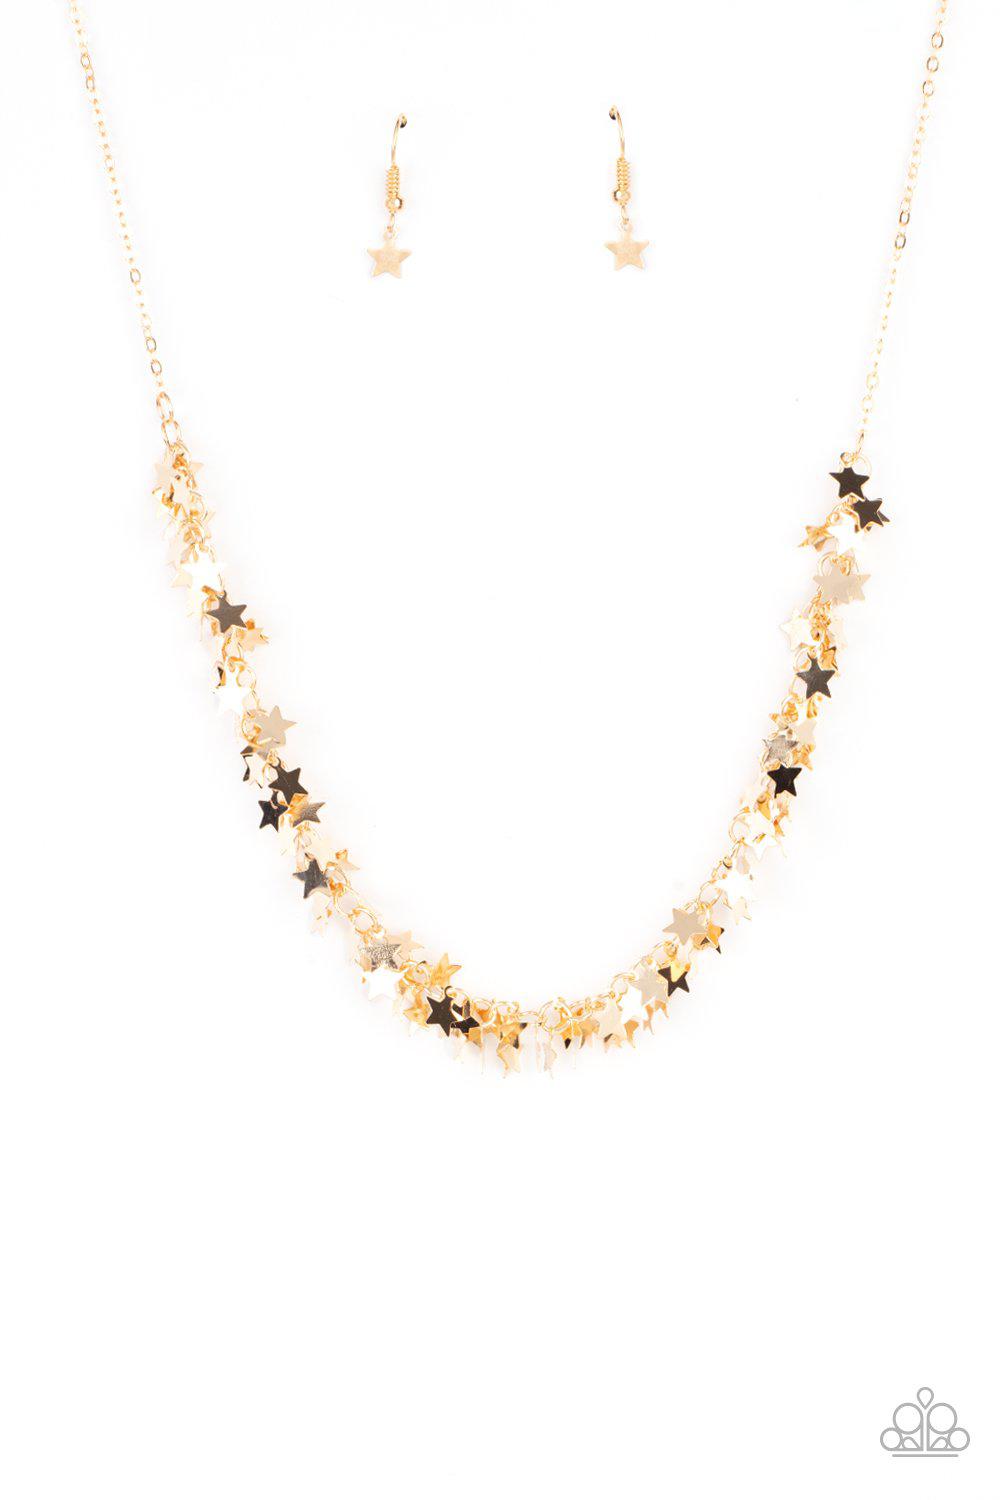 Starry Anthem Gold Star Necklace - Paparazzi Accessories- lightbox - CarasShop.com - $5 Jewelry by Cara Jewels